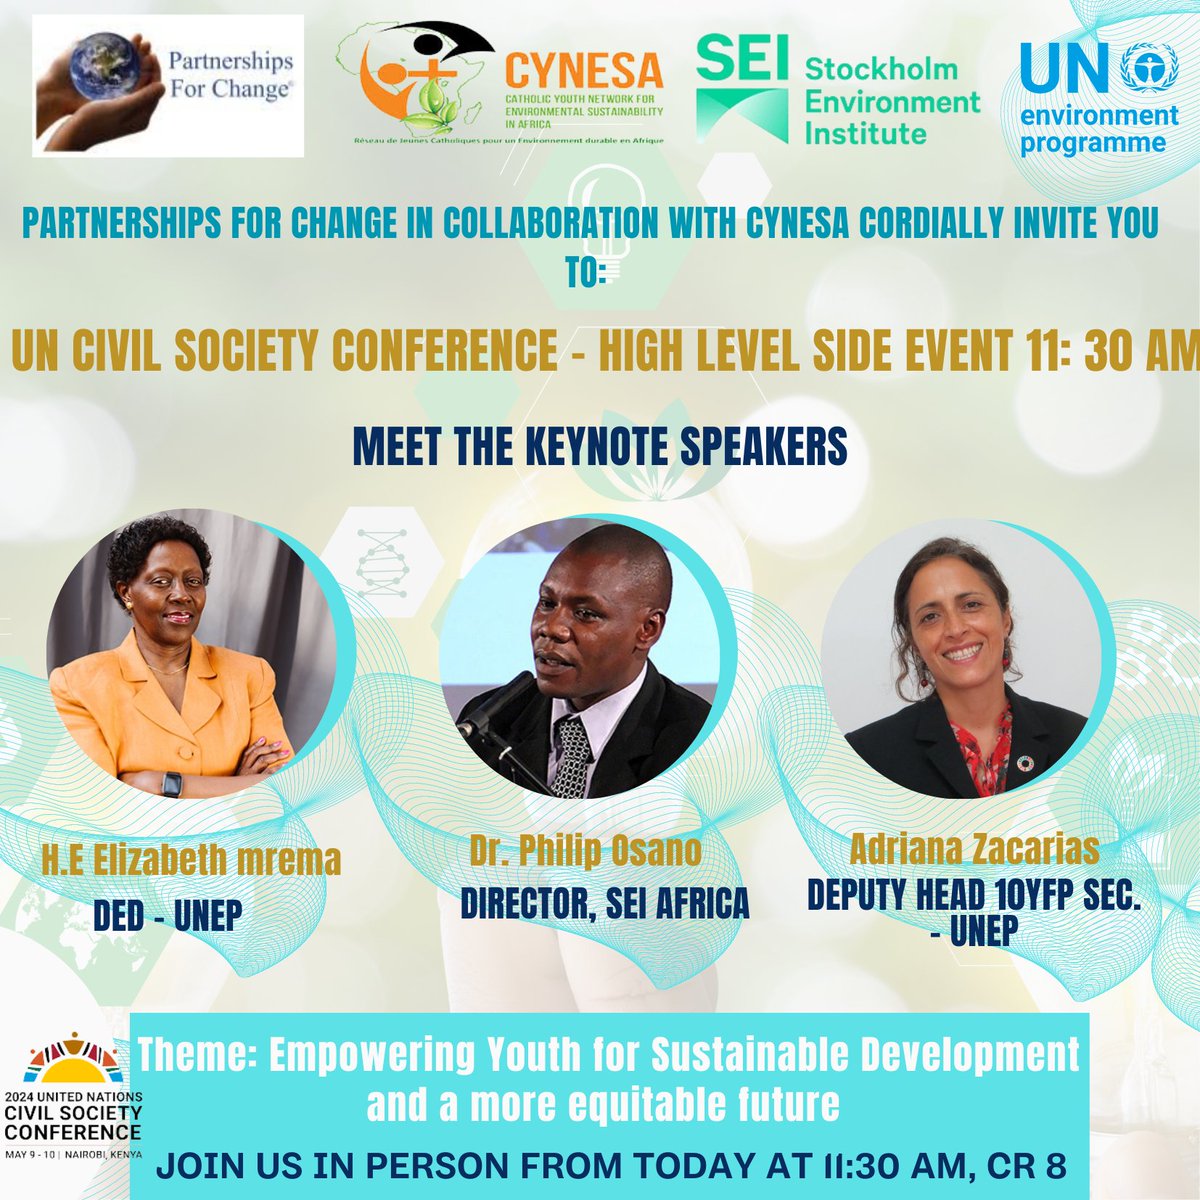 As we look ahead to the #SummitofTheFuture, today at 11:00 a.m @PFCtweet1 and @CYNESA will be hosting highly distinguished speakers who will tackle #Youth empowerment for sustainable development and a more equitable future. #UNCSC. 
@MuiaAlphonce @PMOsano @mremae @Adriana_GO4SDGs